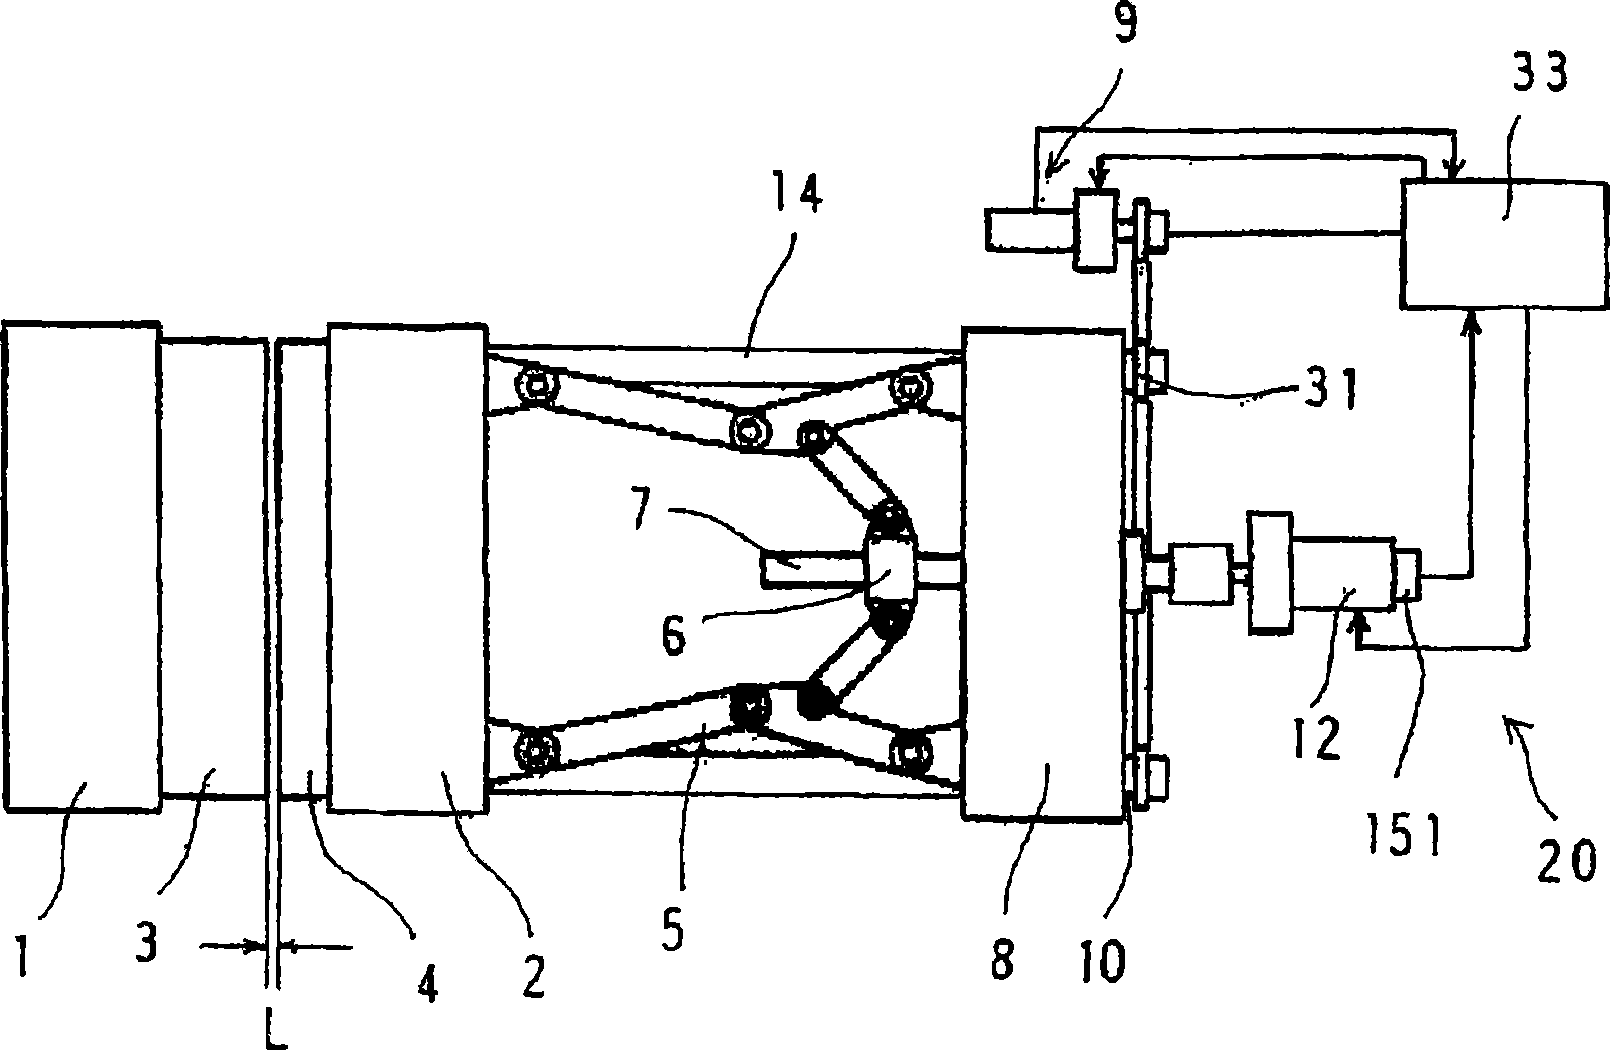 Foamed resin molding machine and method of operating the same